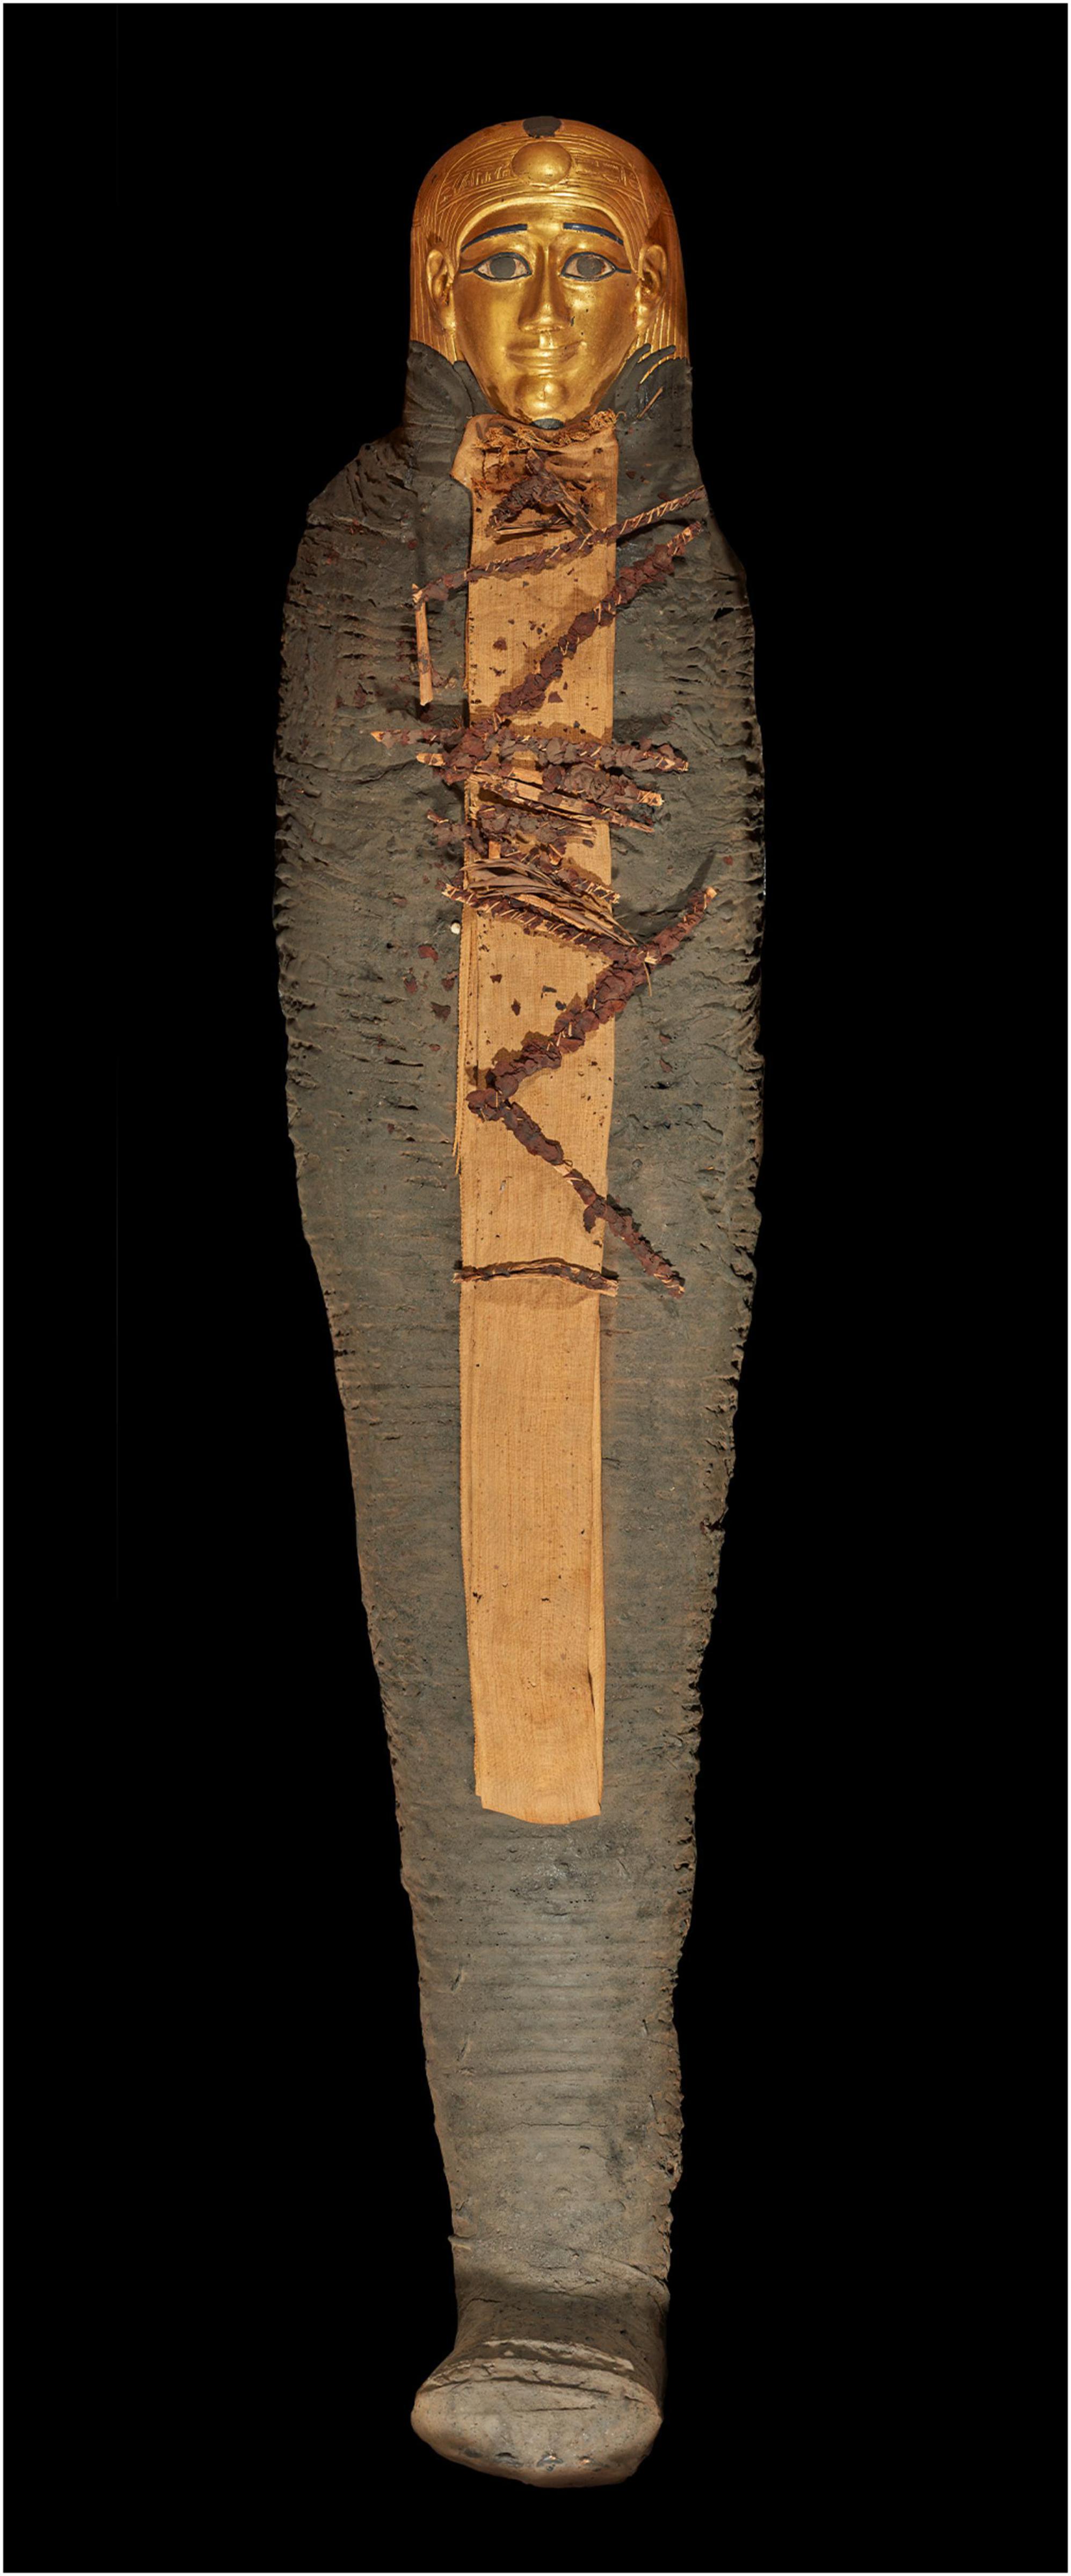 Scanning and three-dimensional-printing using computed tomography of the “Golden Boy” mummy